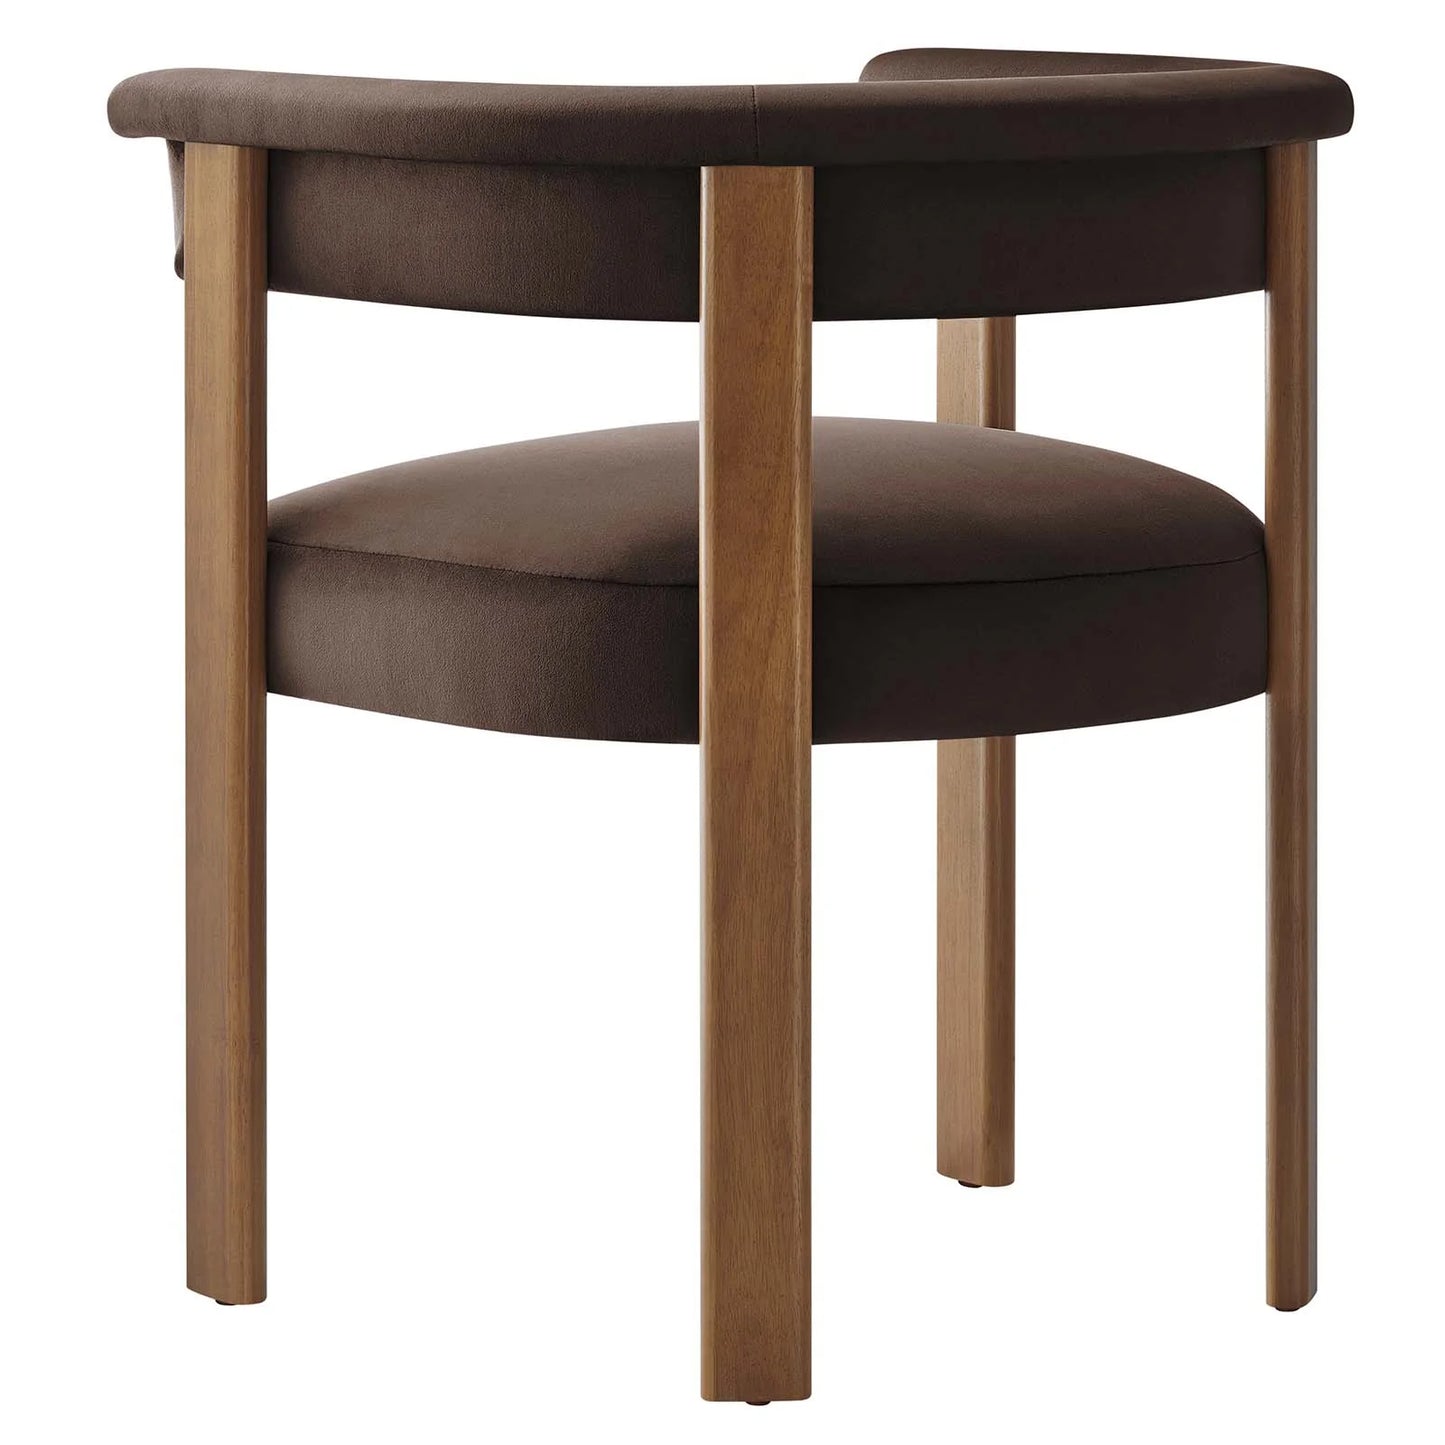 Knox Velvet Dining Chairs - Set of 2